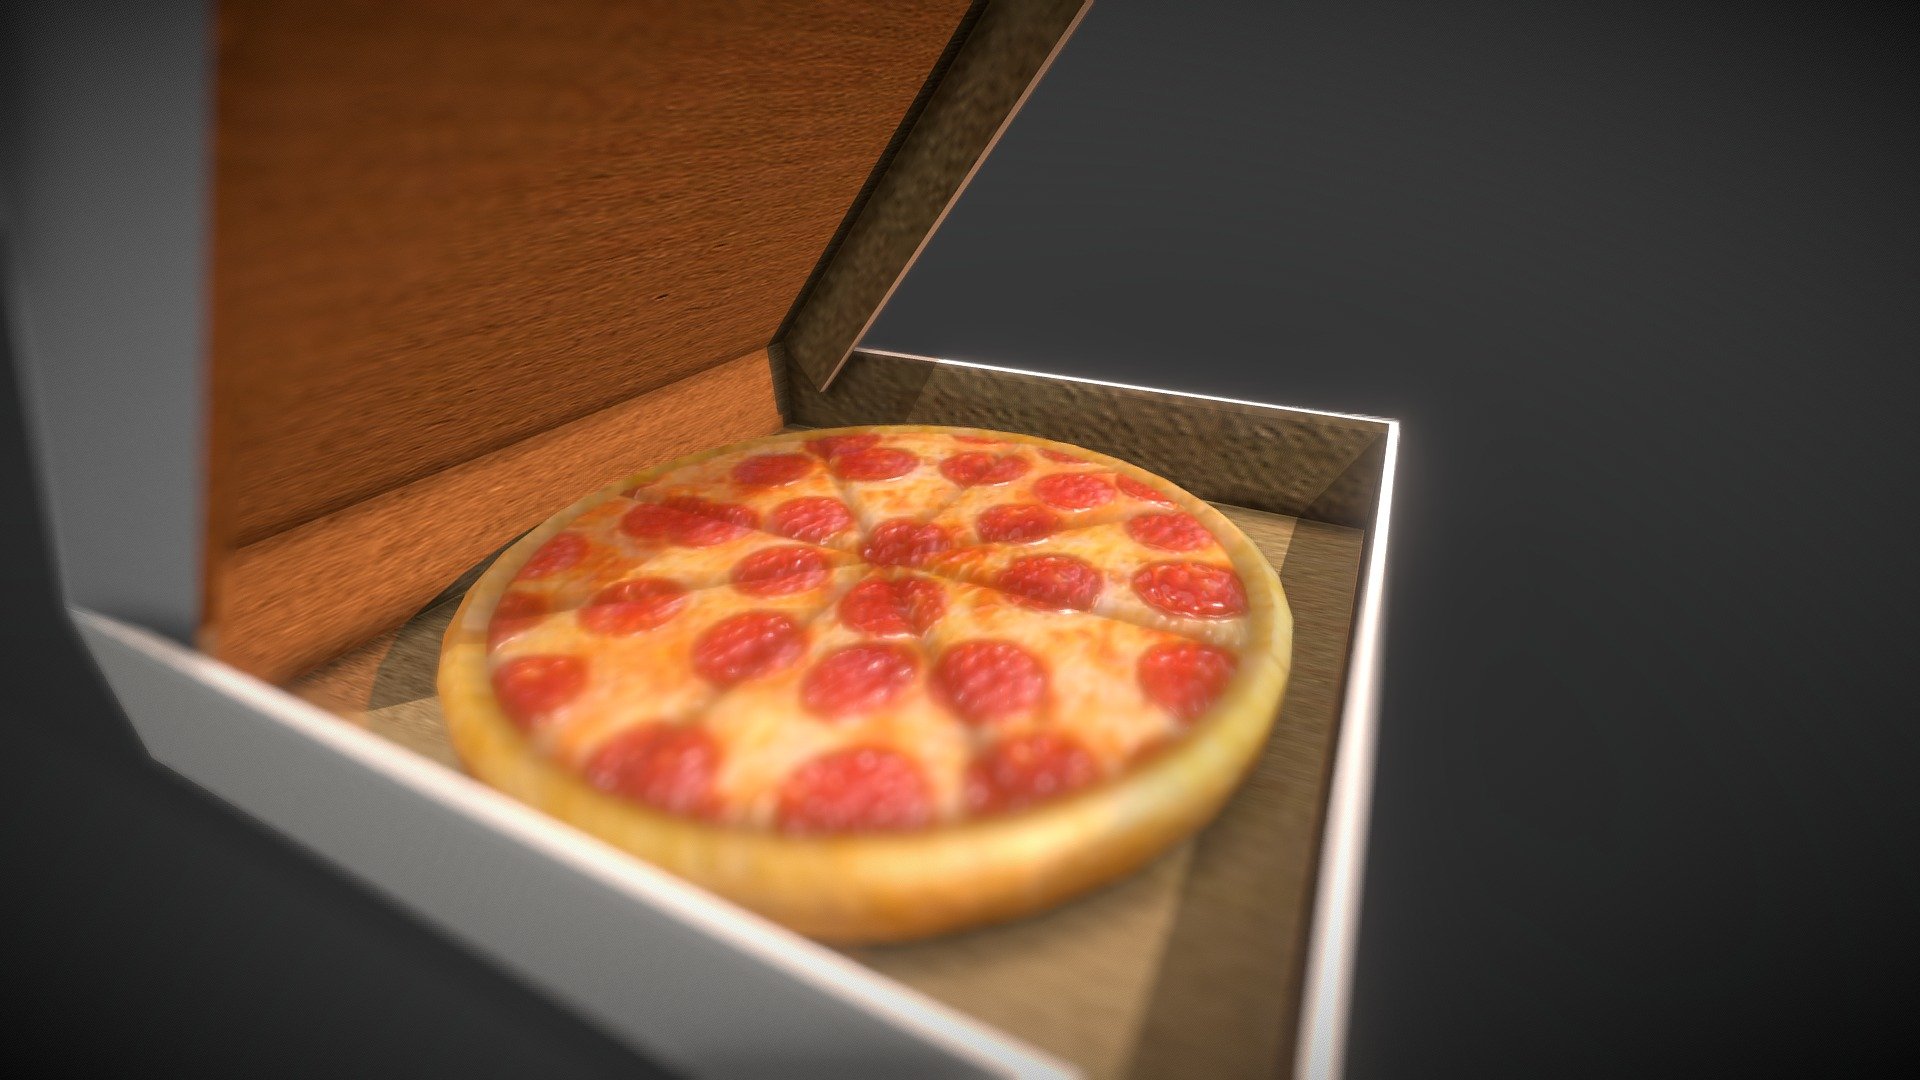 Just a simple pizza box experimenting with a couple different texturing techniques. There's some issues with the download on here if anyone wants the raw file just let me know I'll try to get it to you 3d model